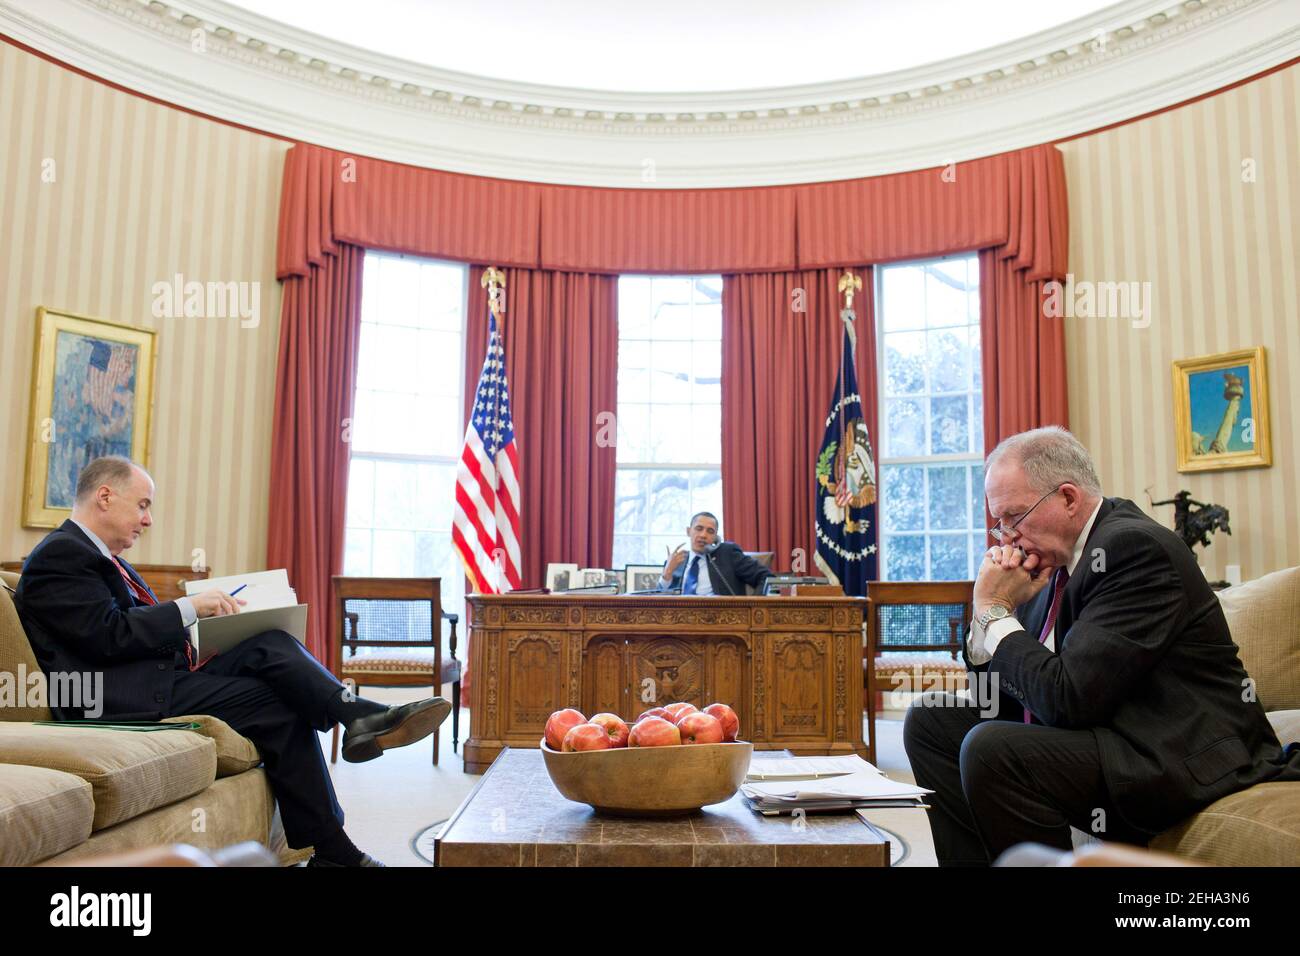 National Security Advisor Tom Donilon and John Brennan, Assistant to the President for Homeland Security and Counterterrorism, right, listen as President Barack Obama talks on the phone in the Oval Office, March 16, 2011. Stock Photo